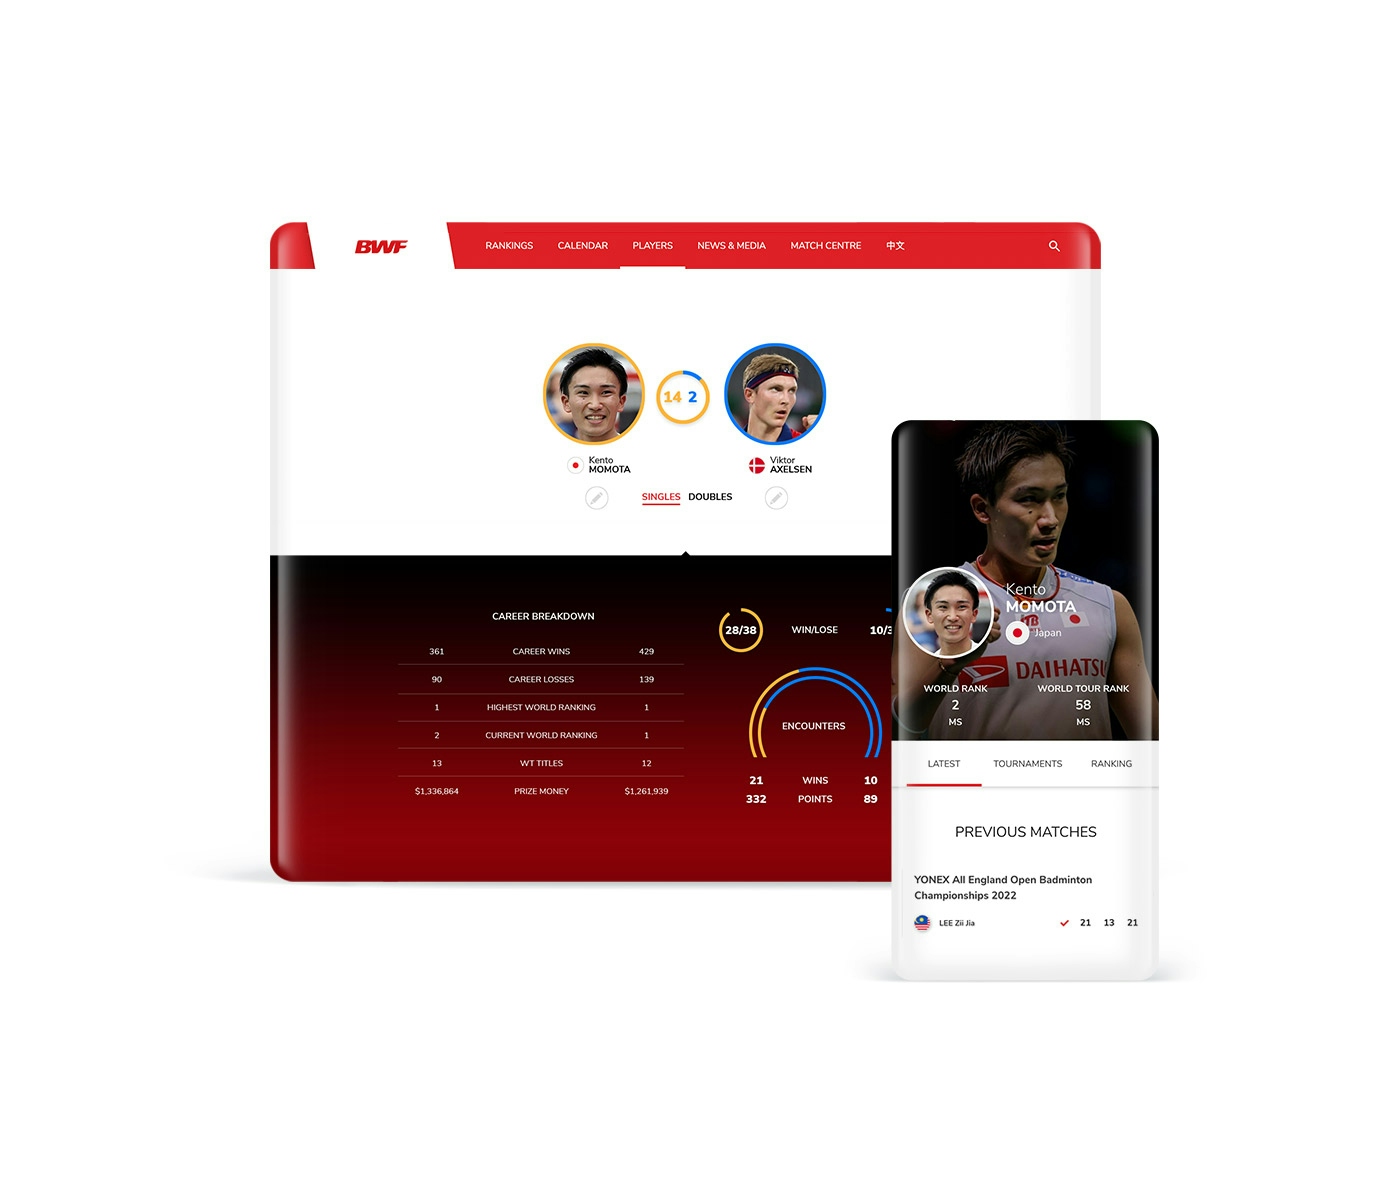 screen designs for head-to-head and player profile